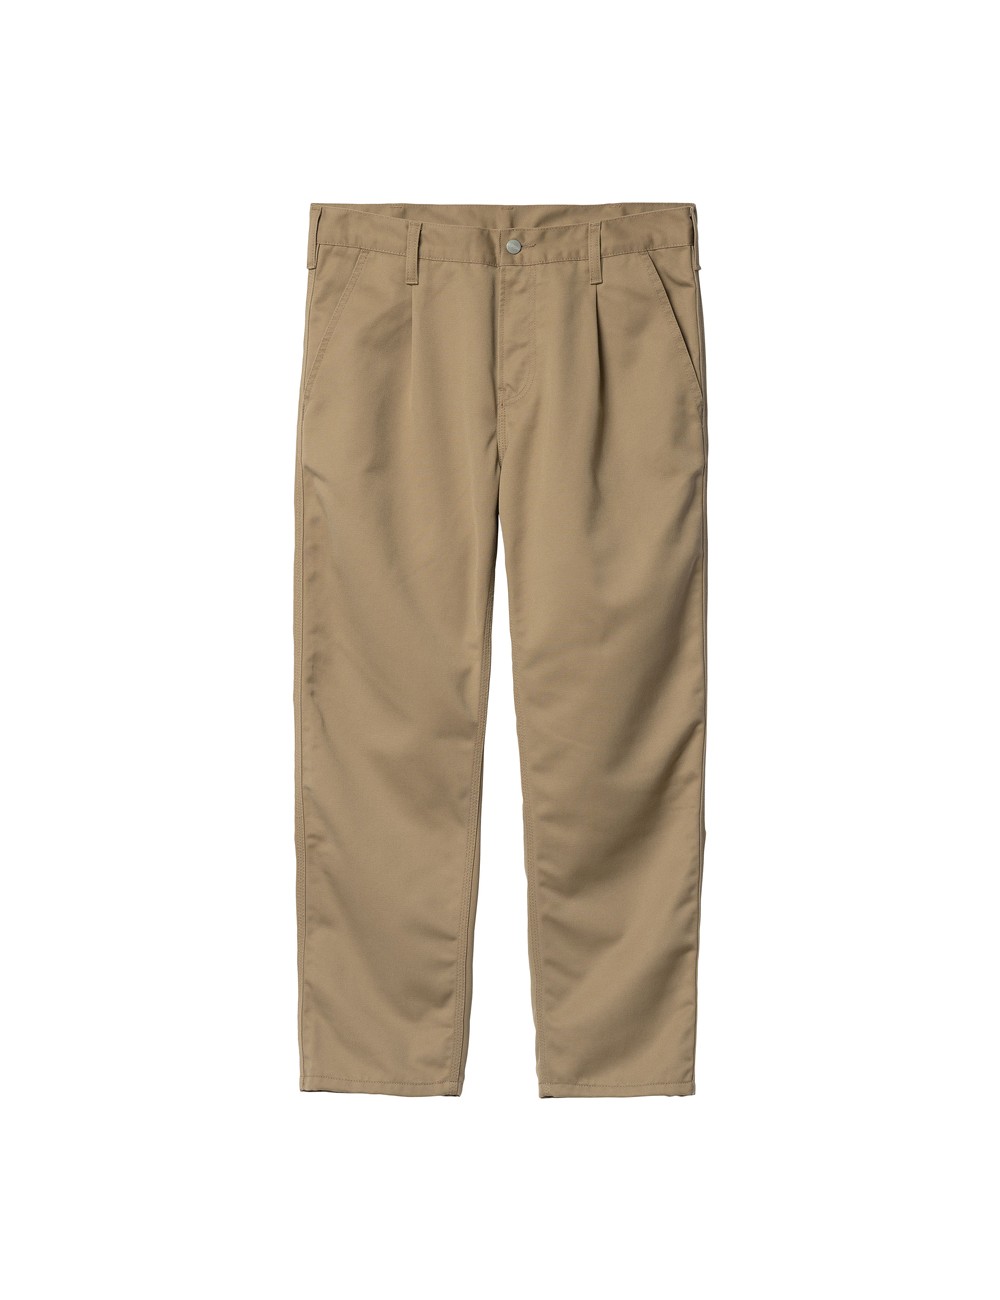 Carhartt WIP Abbott Pant Leather Rinsed I025813-8Y-02